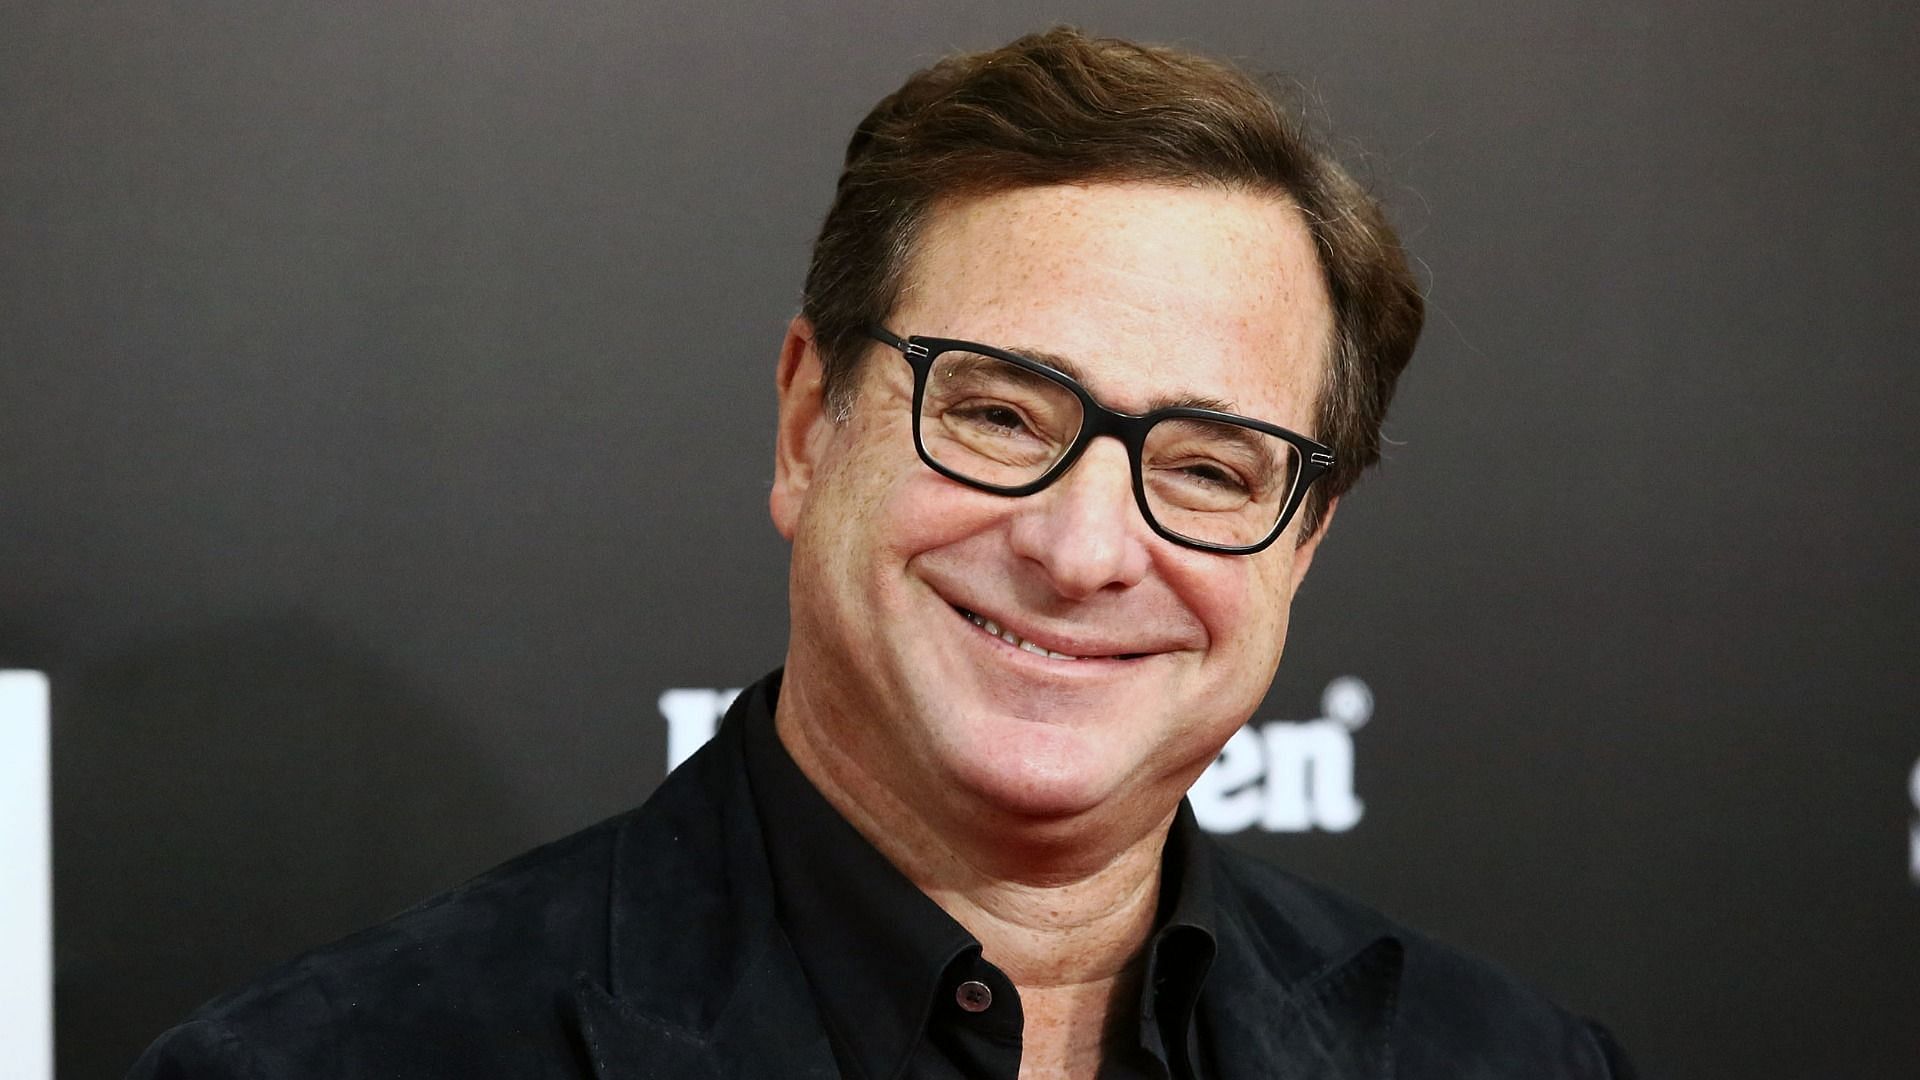 Bob Saget was found dead in his room on January 9,2022 (Image via Getty Images/ Astrid Stawiarz)